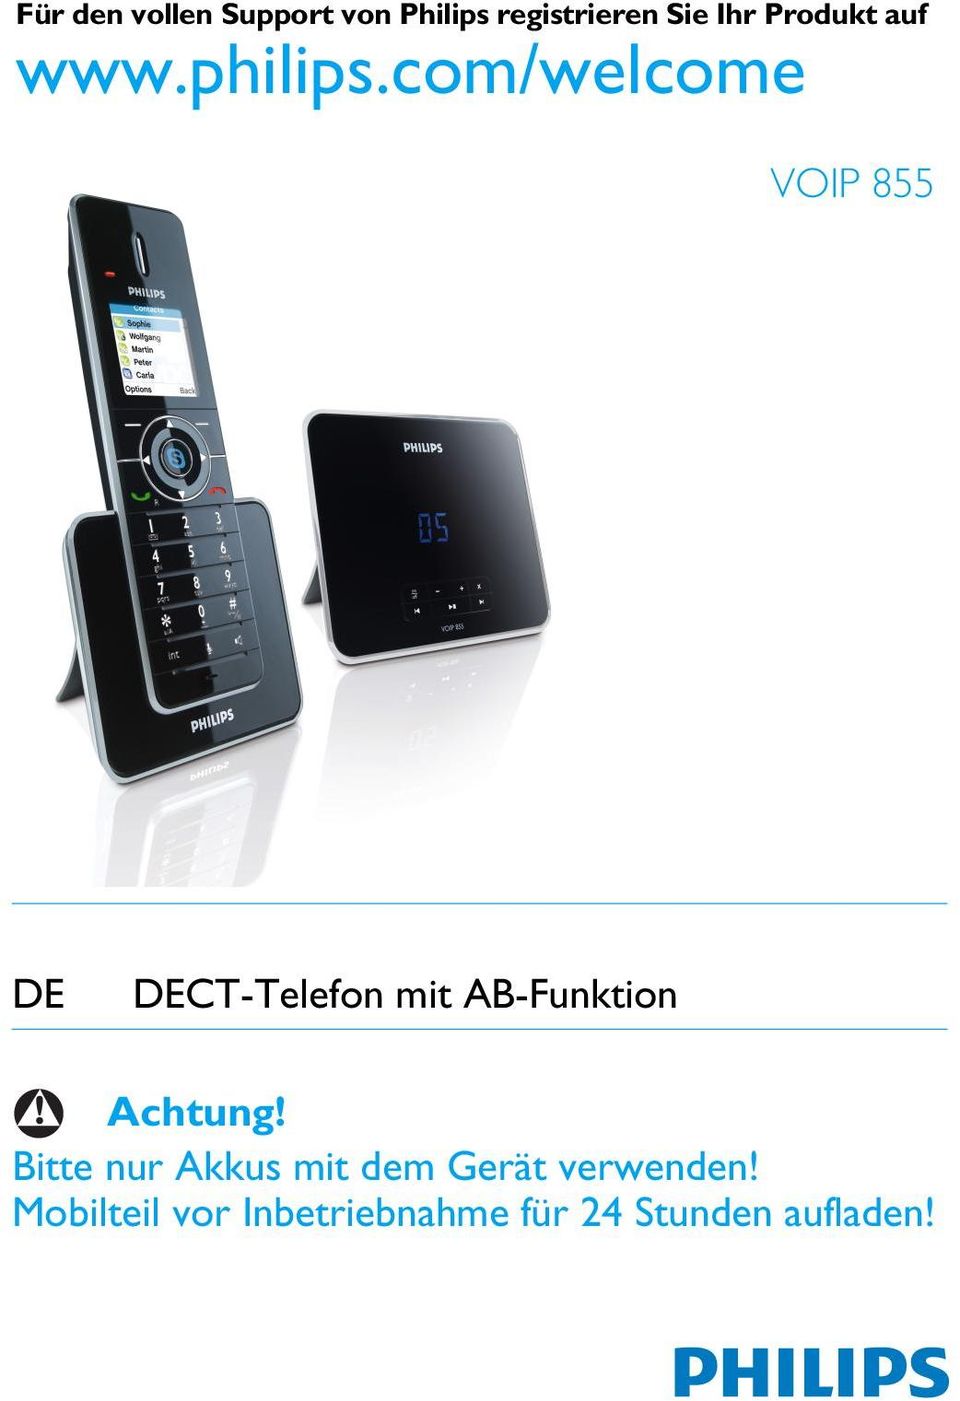 com/welcome VOIP 855 To insert with DE DECT-Telefon mit